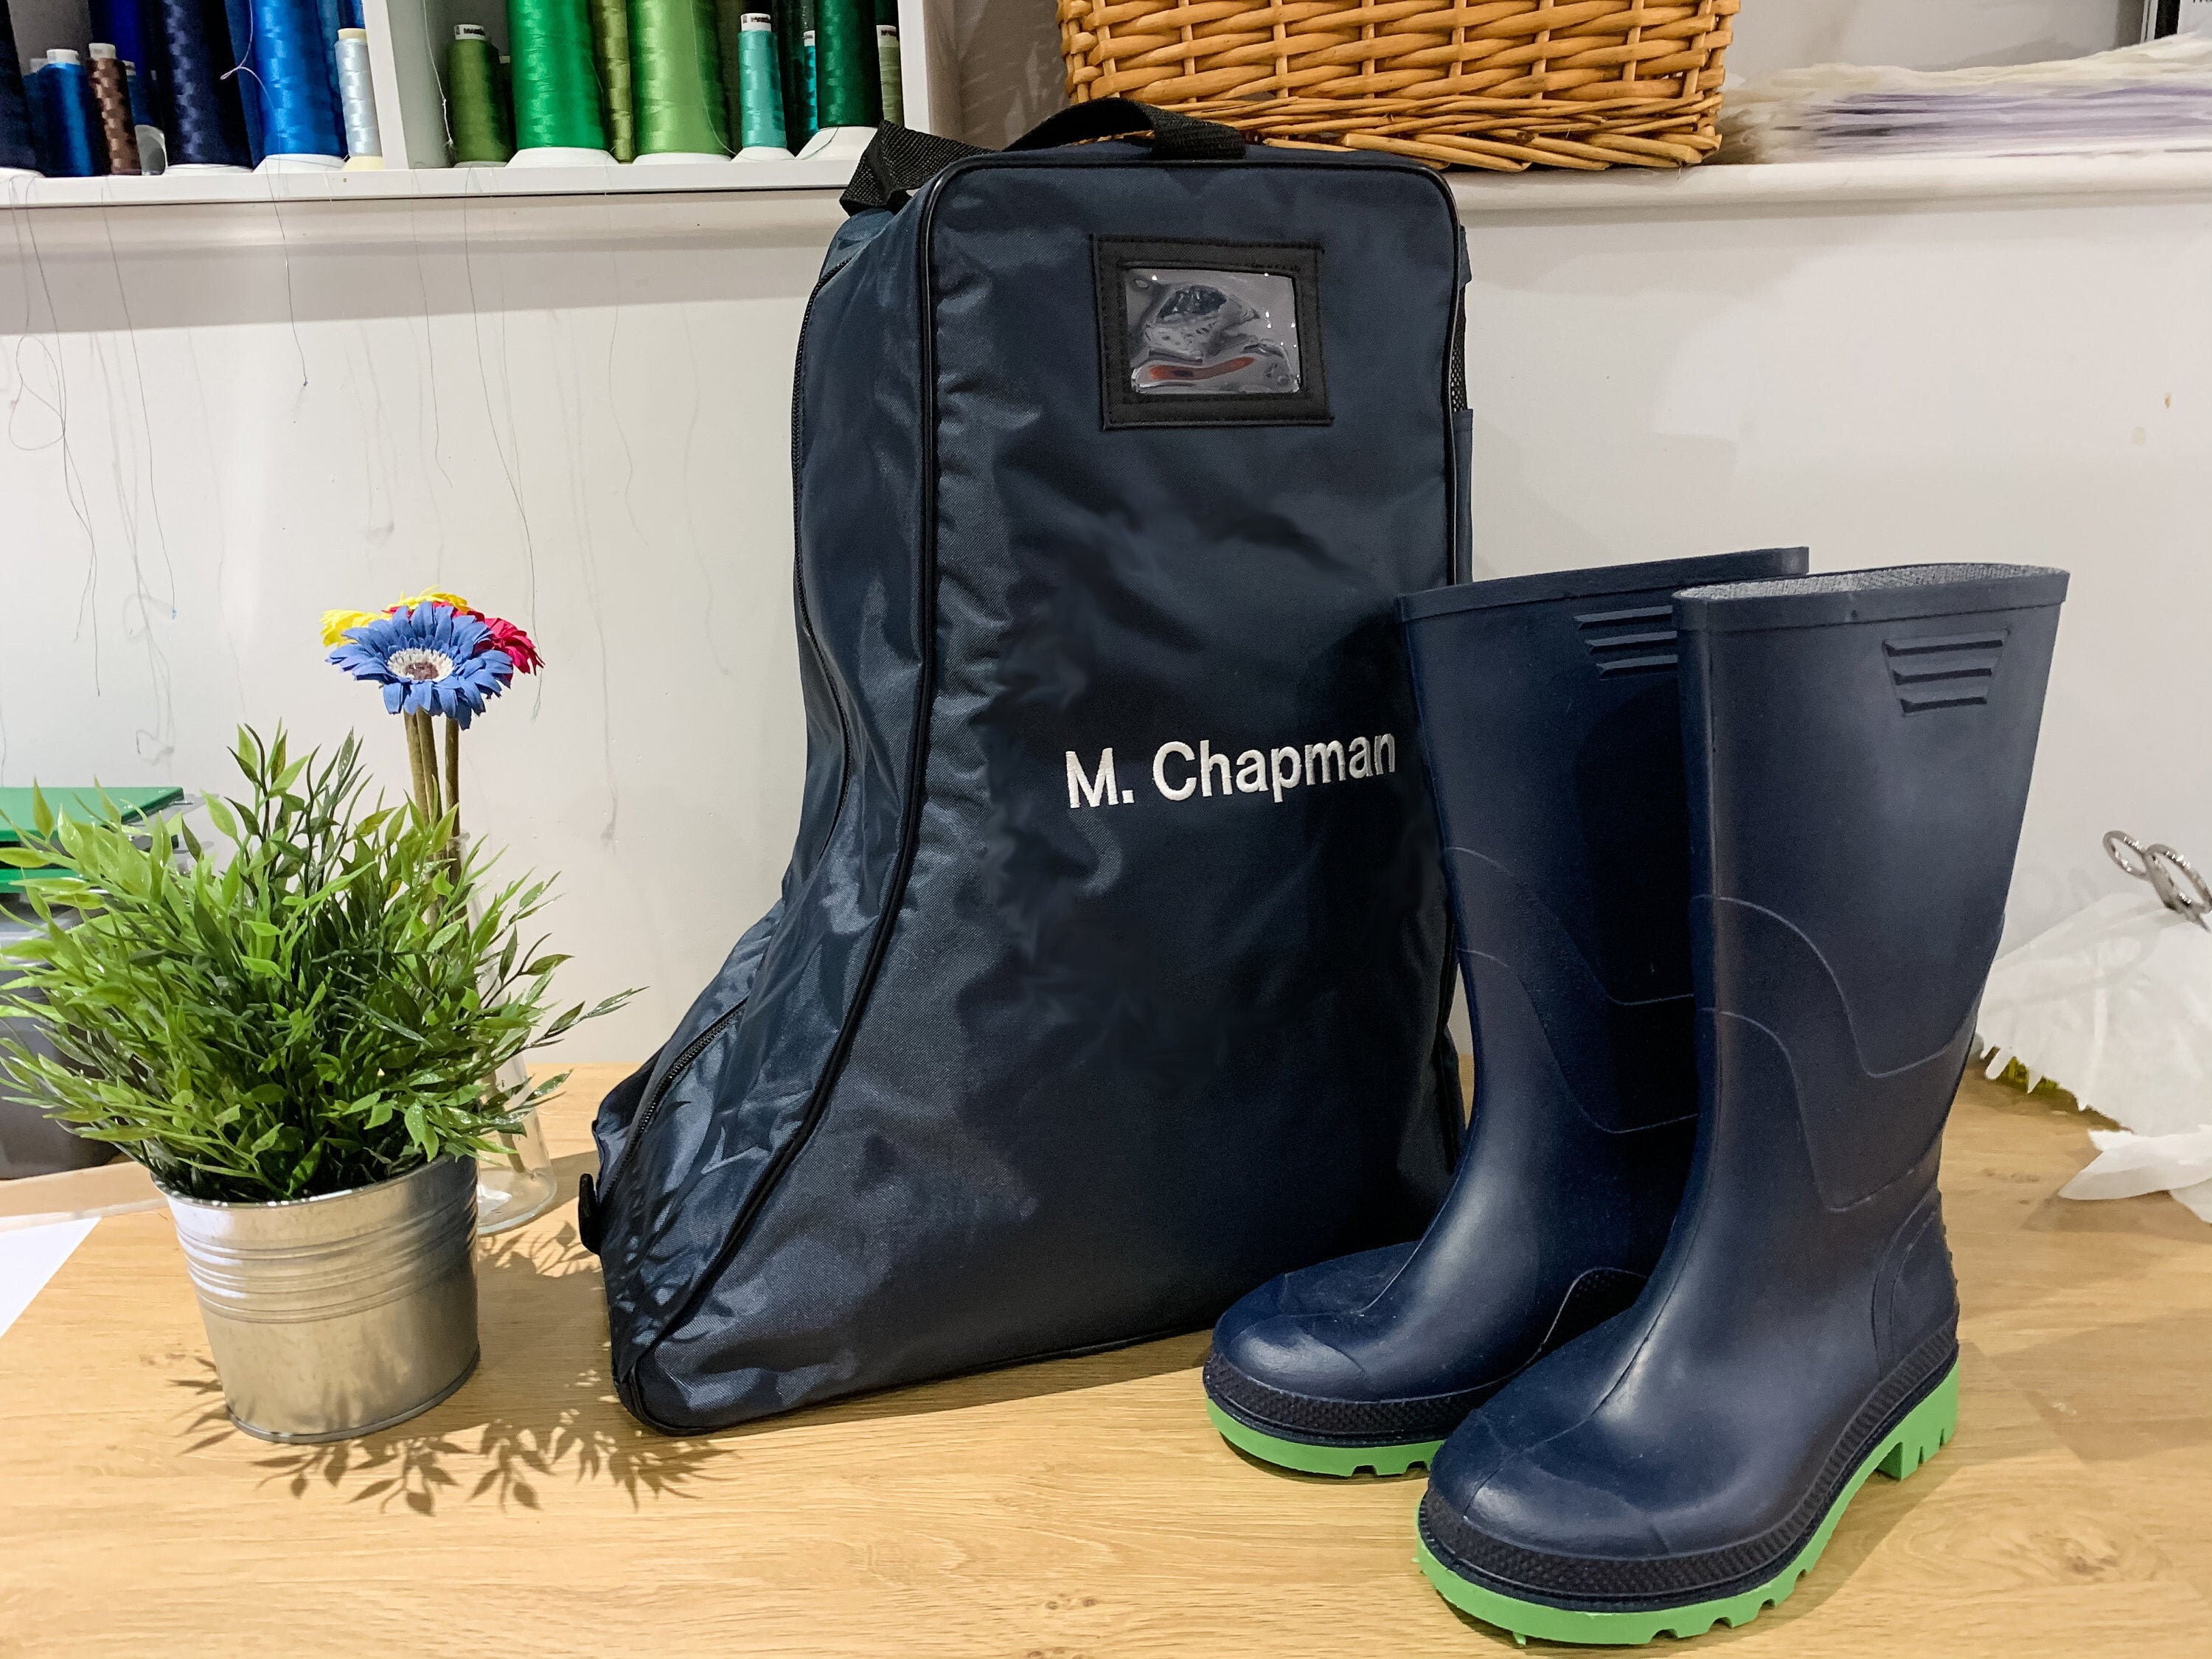 Personalised Welly Boot Bag Embroidered Name or Initials Riding Wellington Horse Riding Boot Holder Muddy Boot Bag Home & Living Storage & Organisation Shoe Storage 